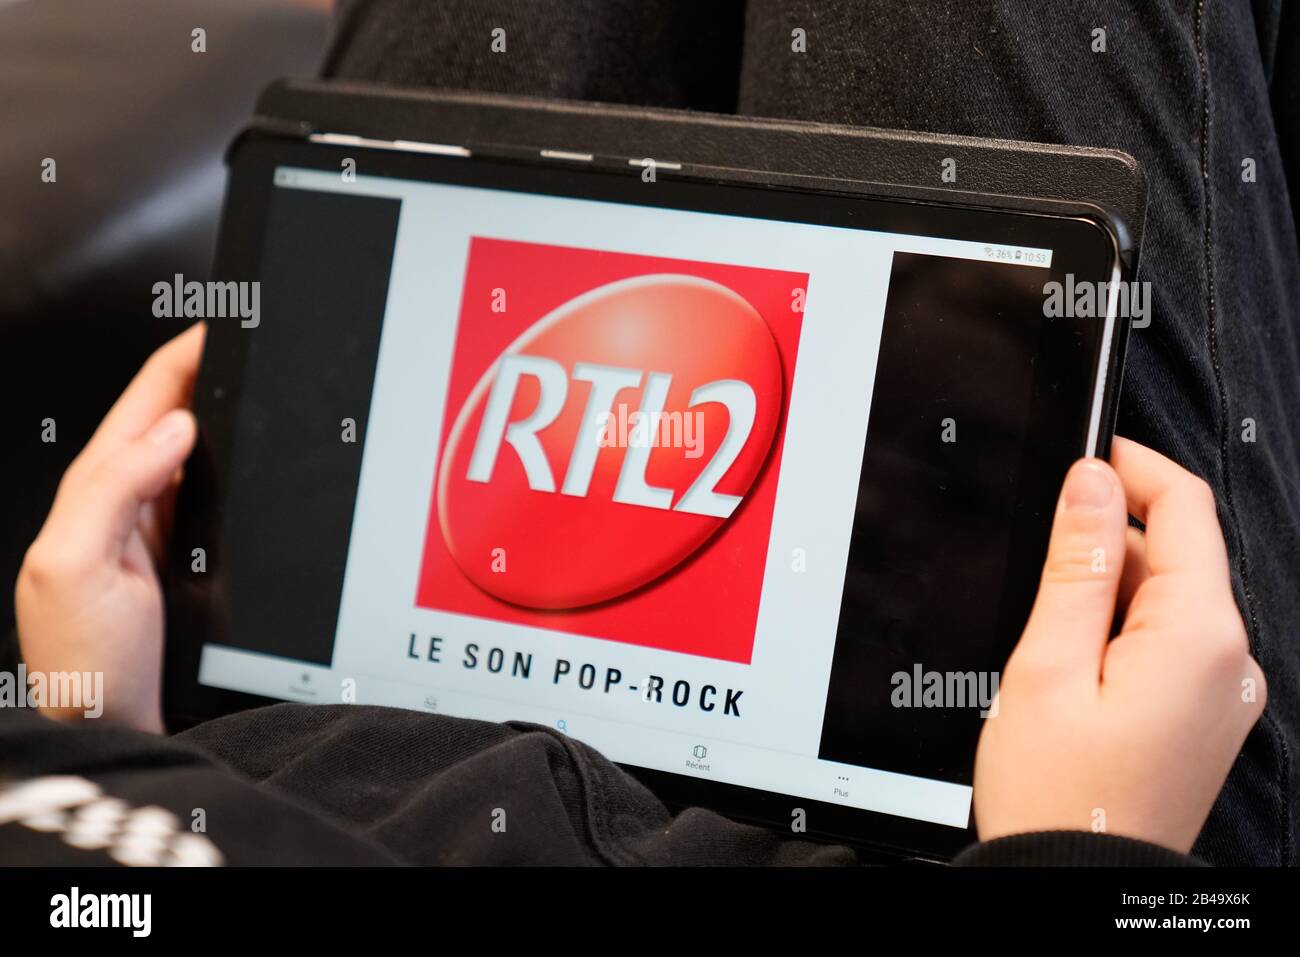 Bordeaux , Aquitaine / France - 11 25 2019 : RTL2 logo sign tablet screen  private French radio station Stock Photo - Alamy